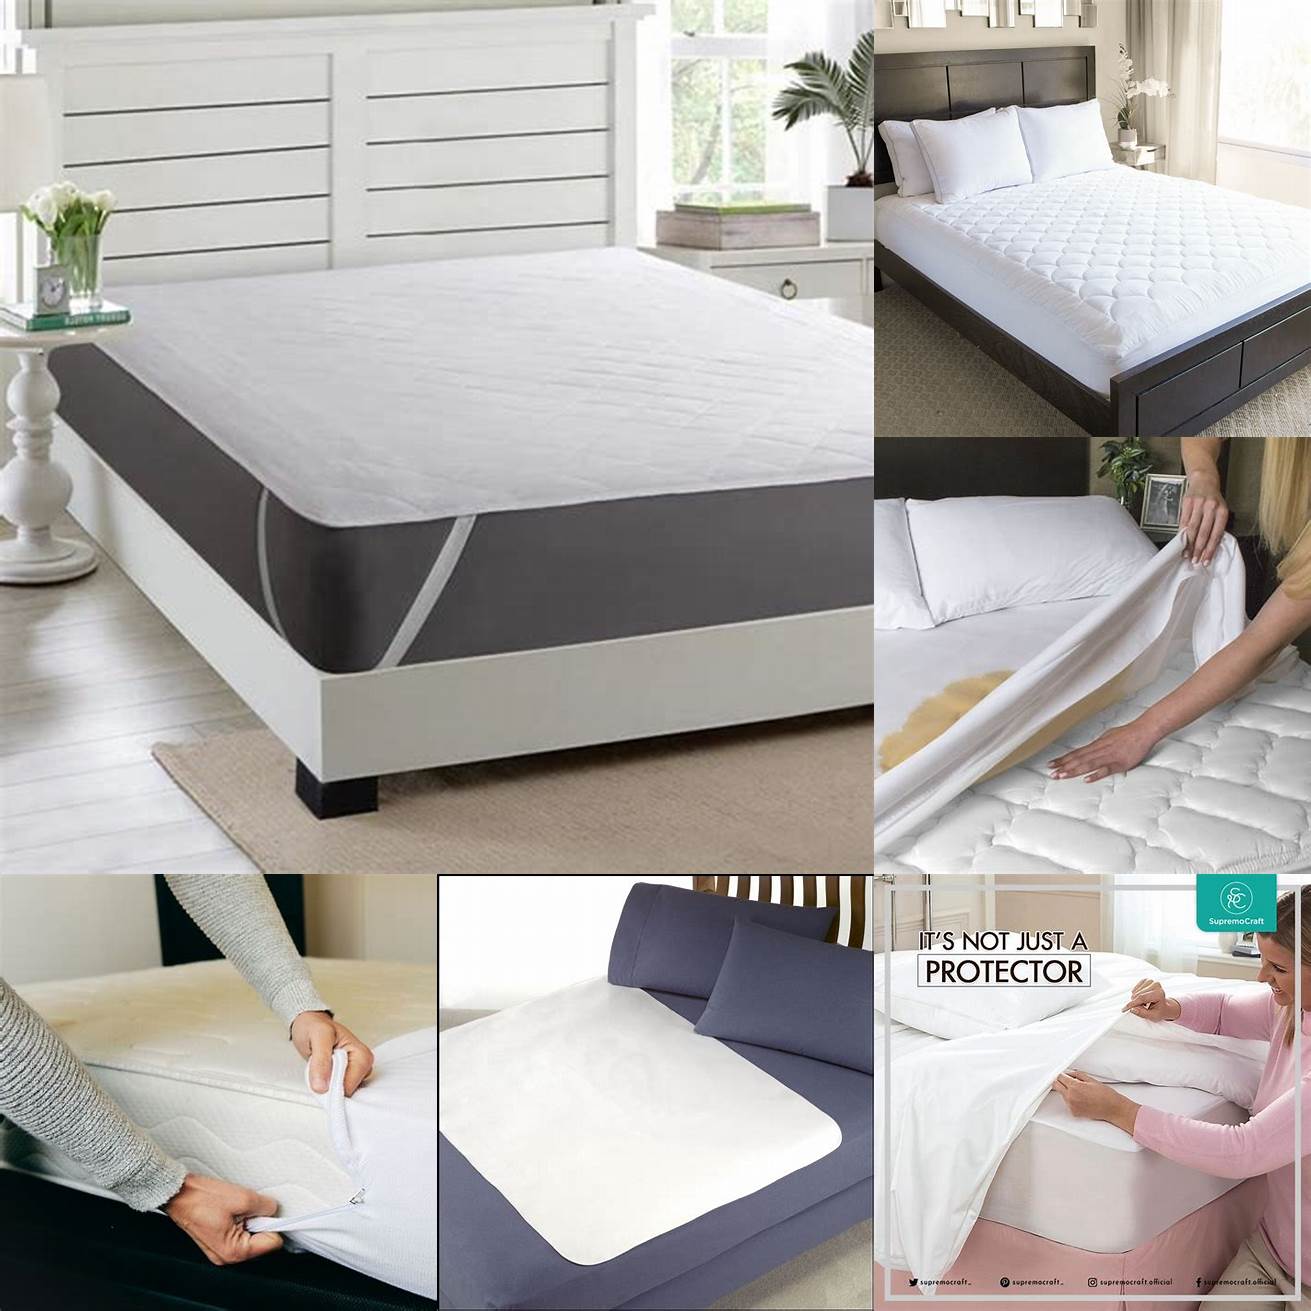 5 Use a mattress protector to protect your mattress from spills and stains